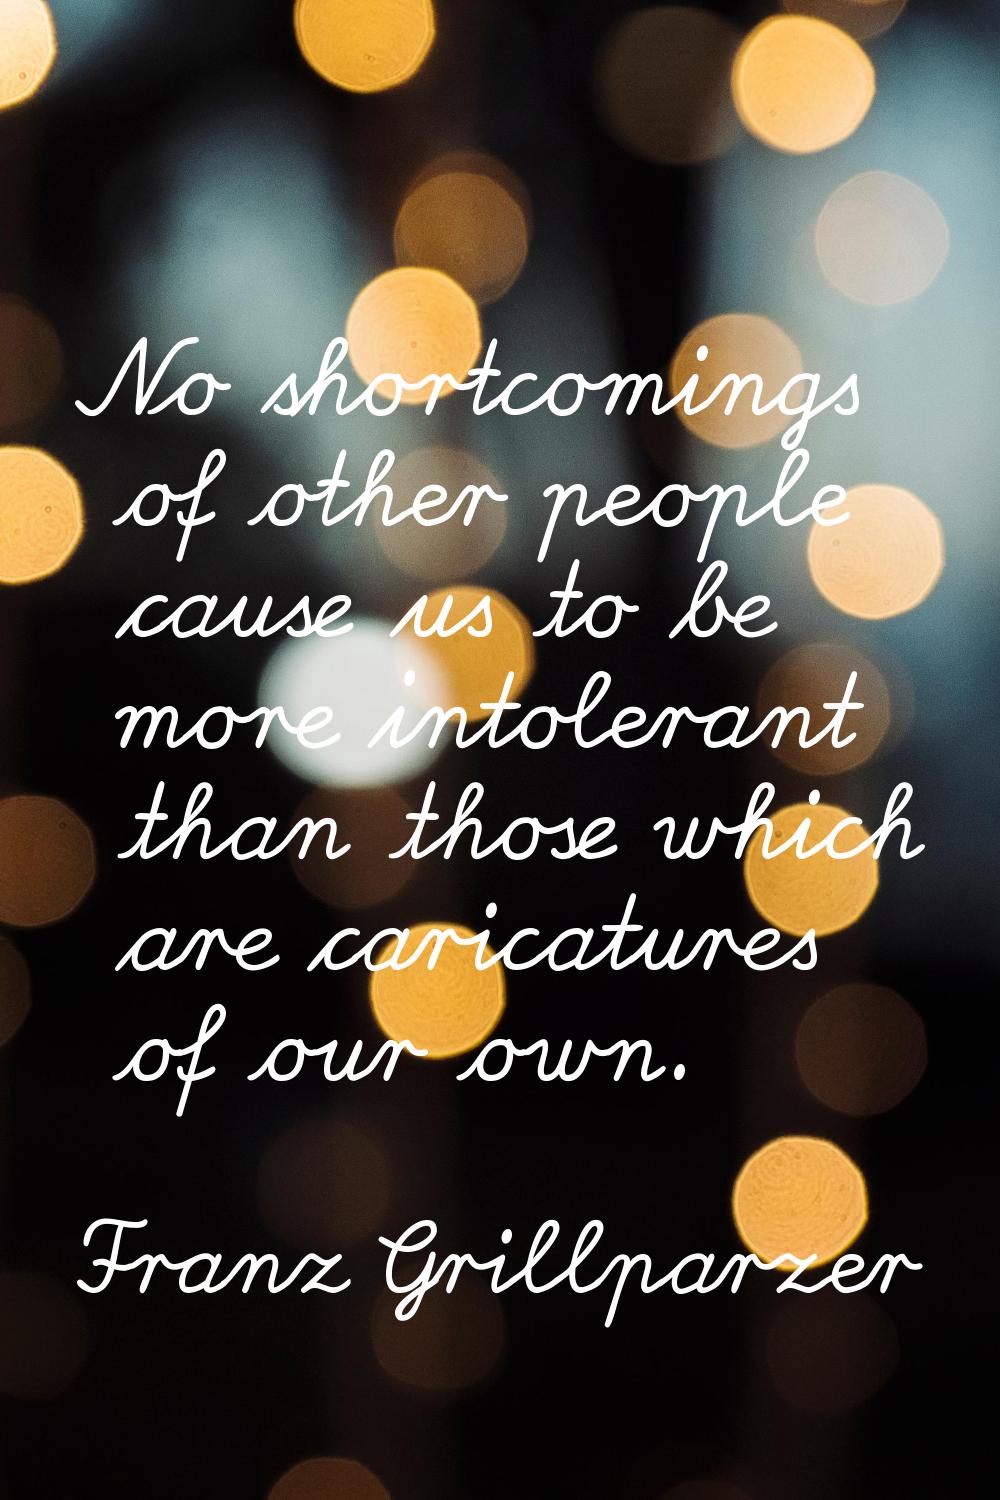 No shortcomings of other people cause us to be more intolerant than those which are caricatures of 